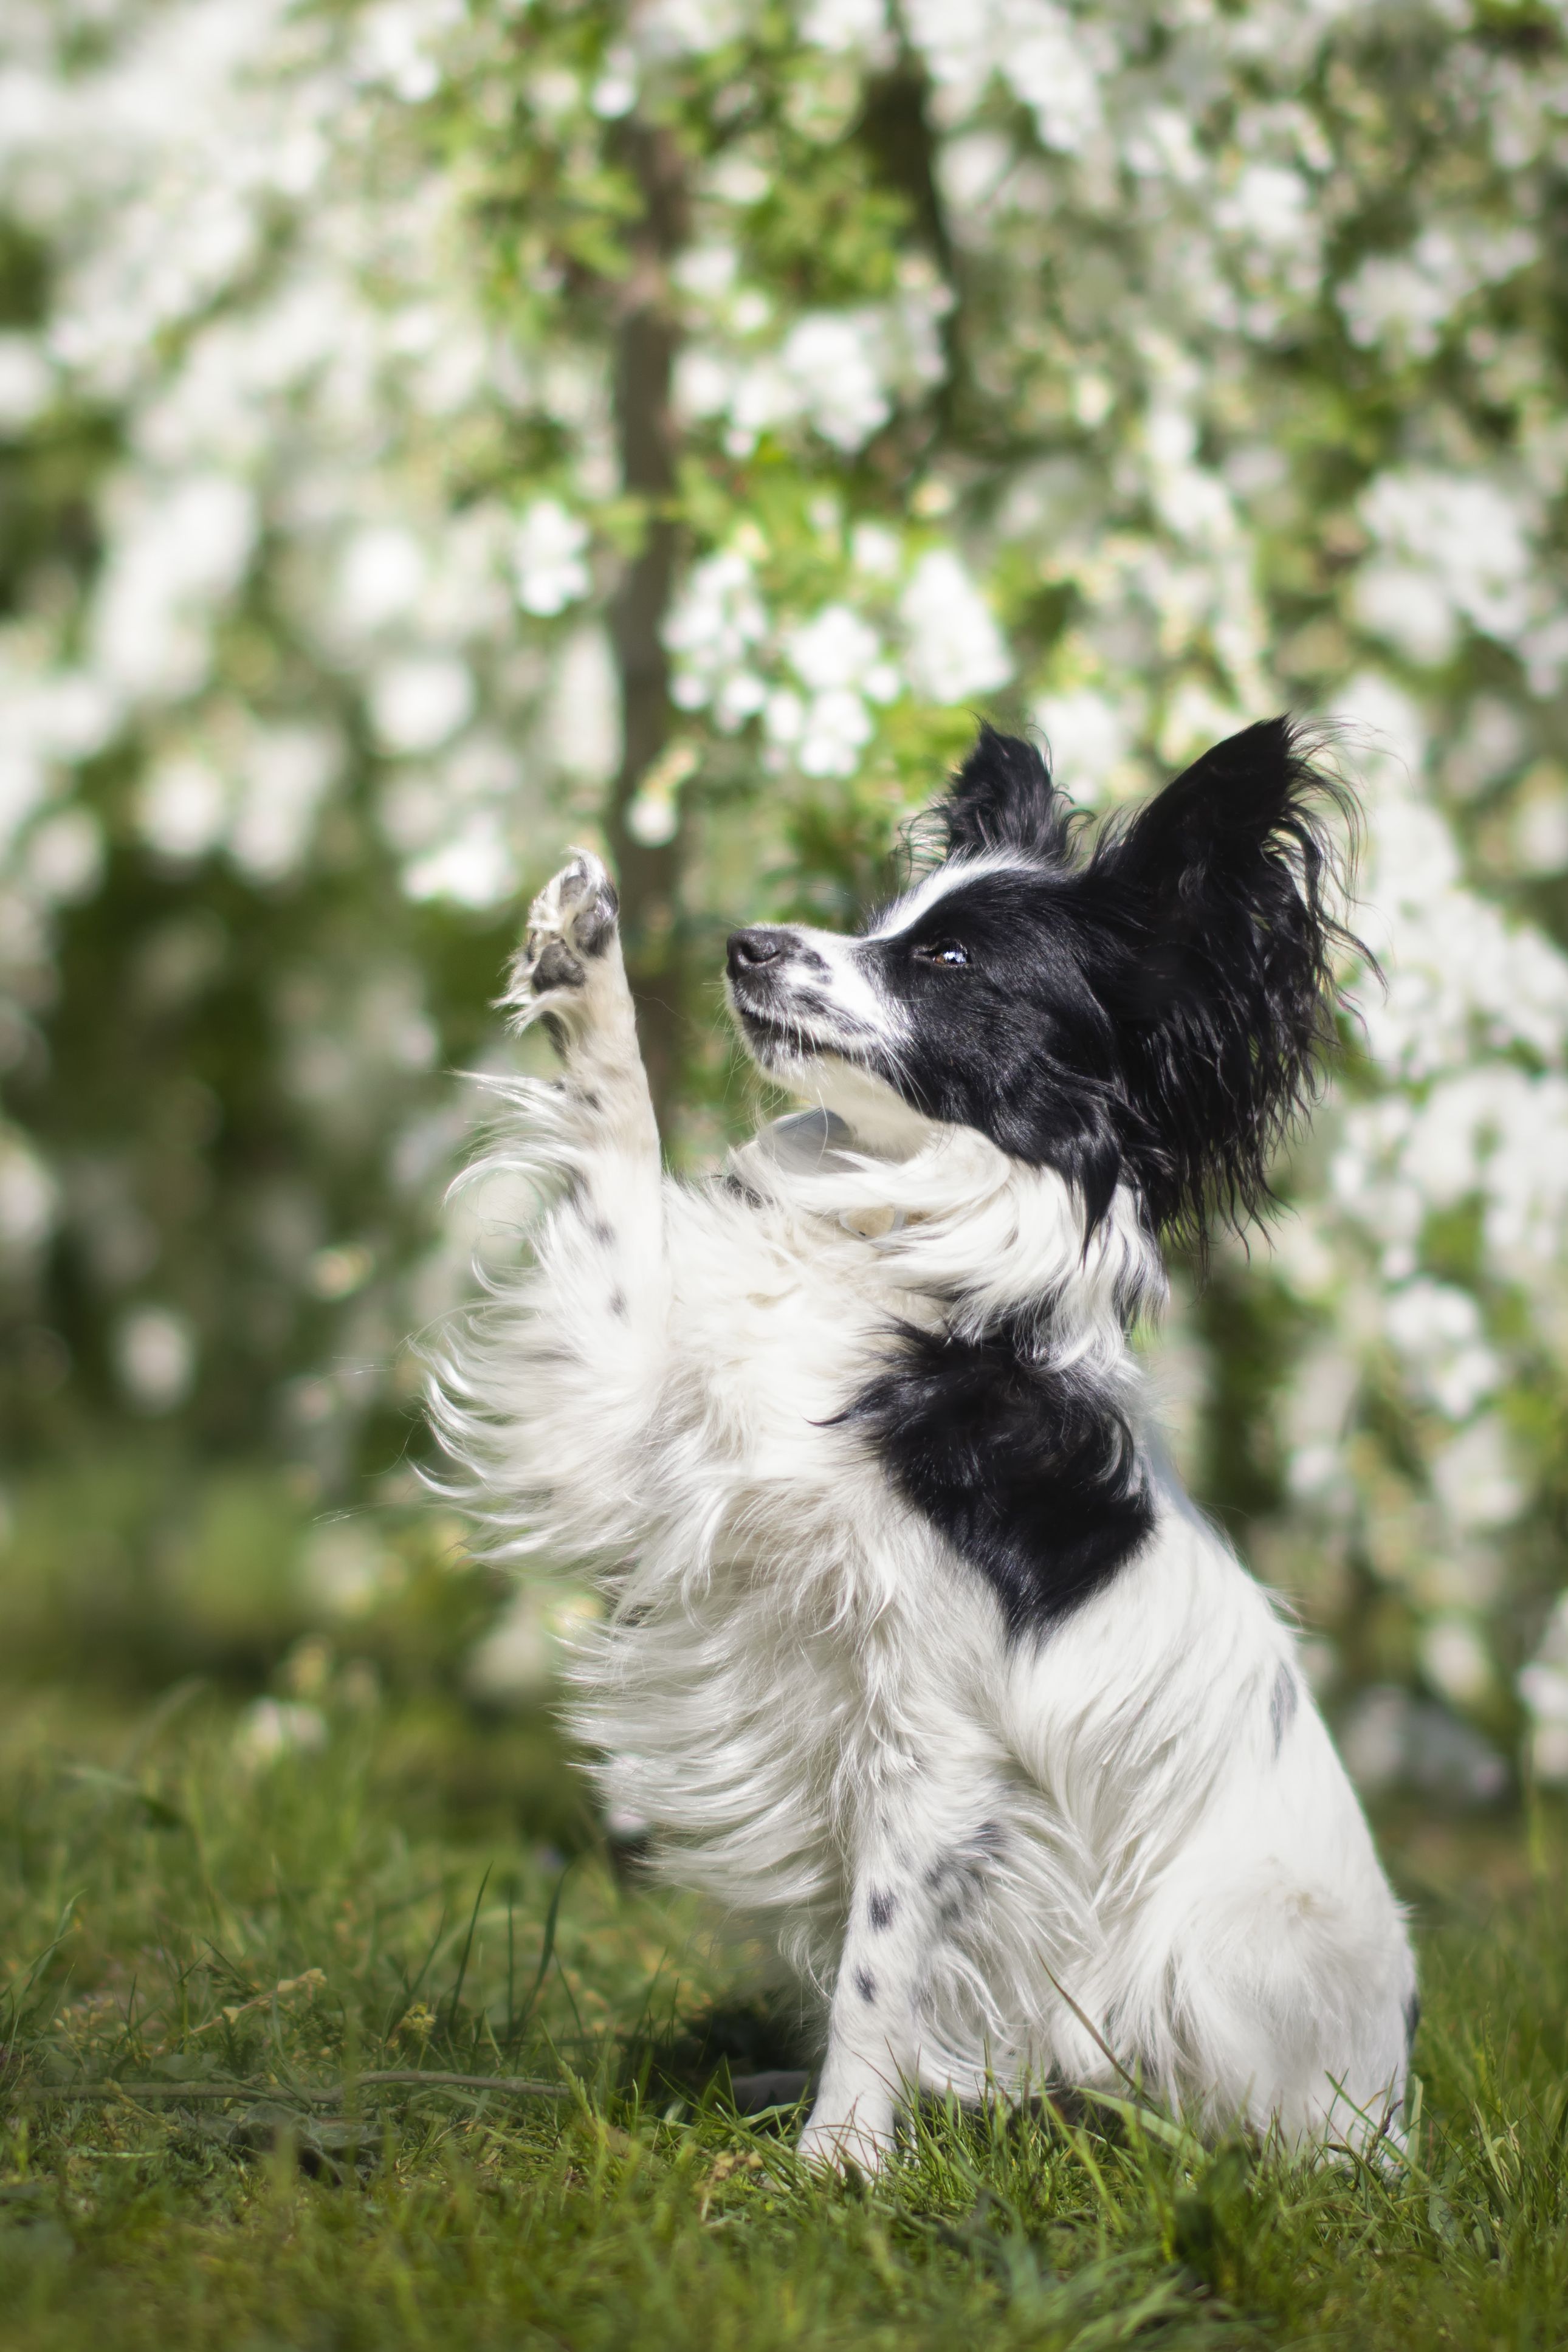 https://hips.hearstapps.com/hmg-prod/images/close-up-of-papillon-dog-running-on-field-poland-royalty-free-image-1650394460.jpg